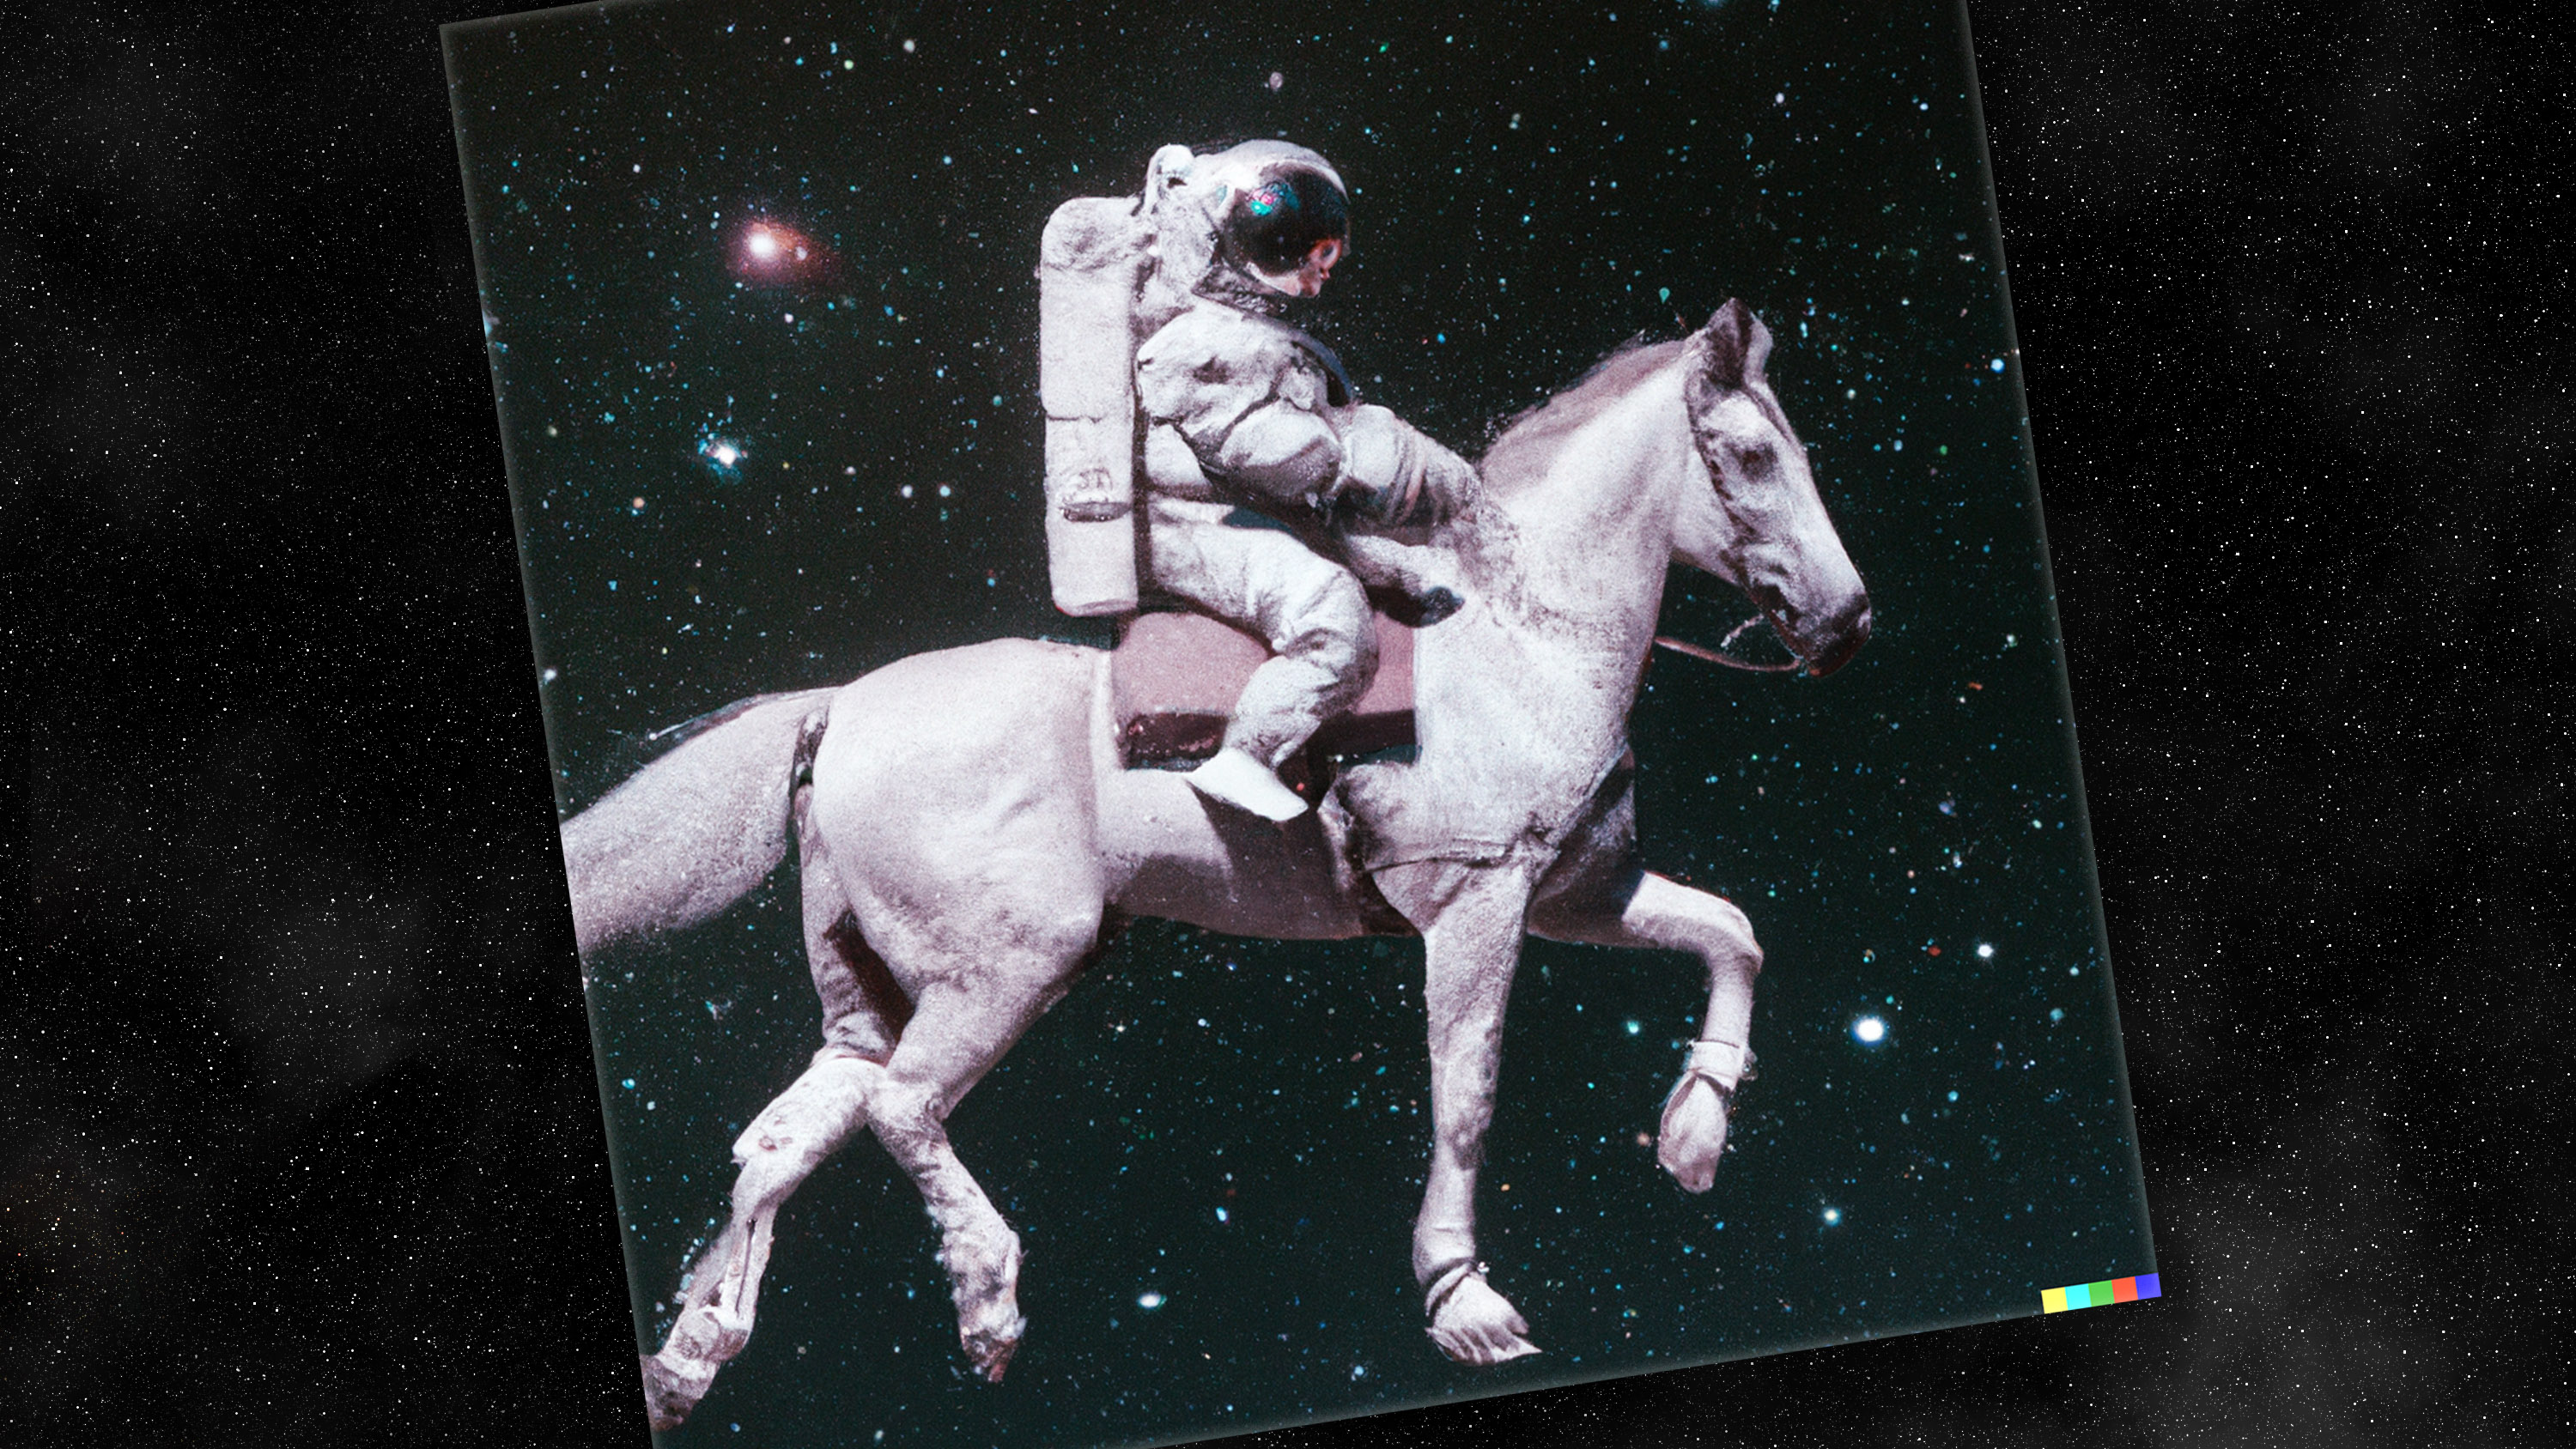 spaceman on a horse generated by DALL-E